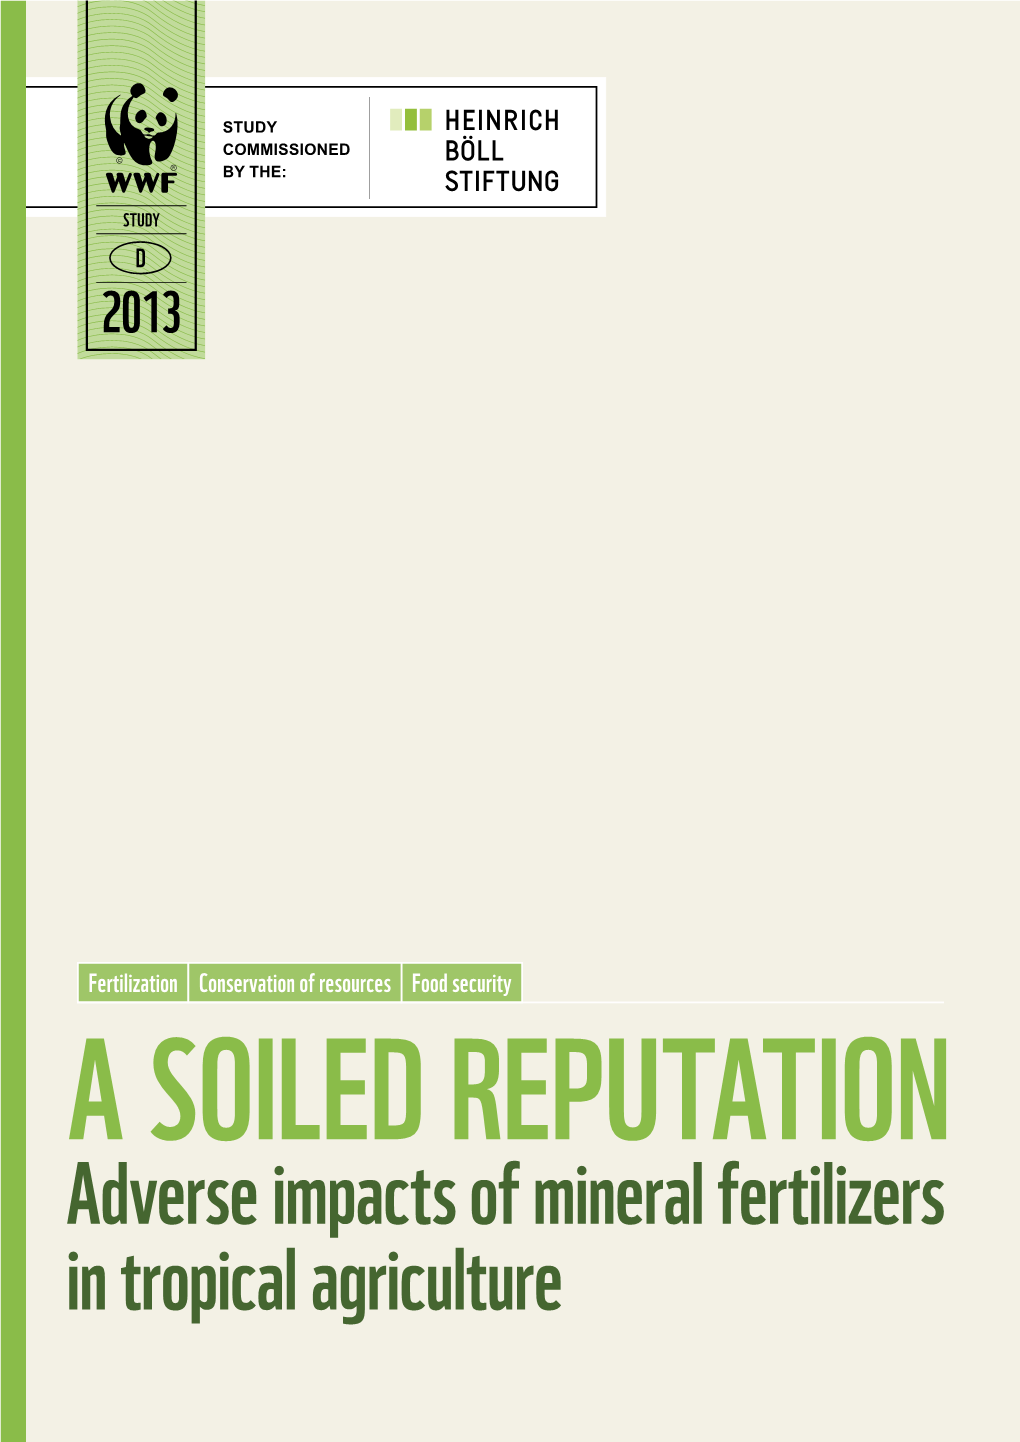 Adverse Impacts of Mineral Fertilizers in Tropical Agriculture Author Johannes Kotschi, AGRECOL – Association for Agriculture and Ecology Table of Contents Summary 6